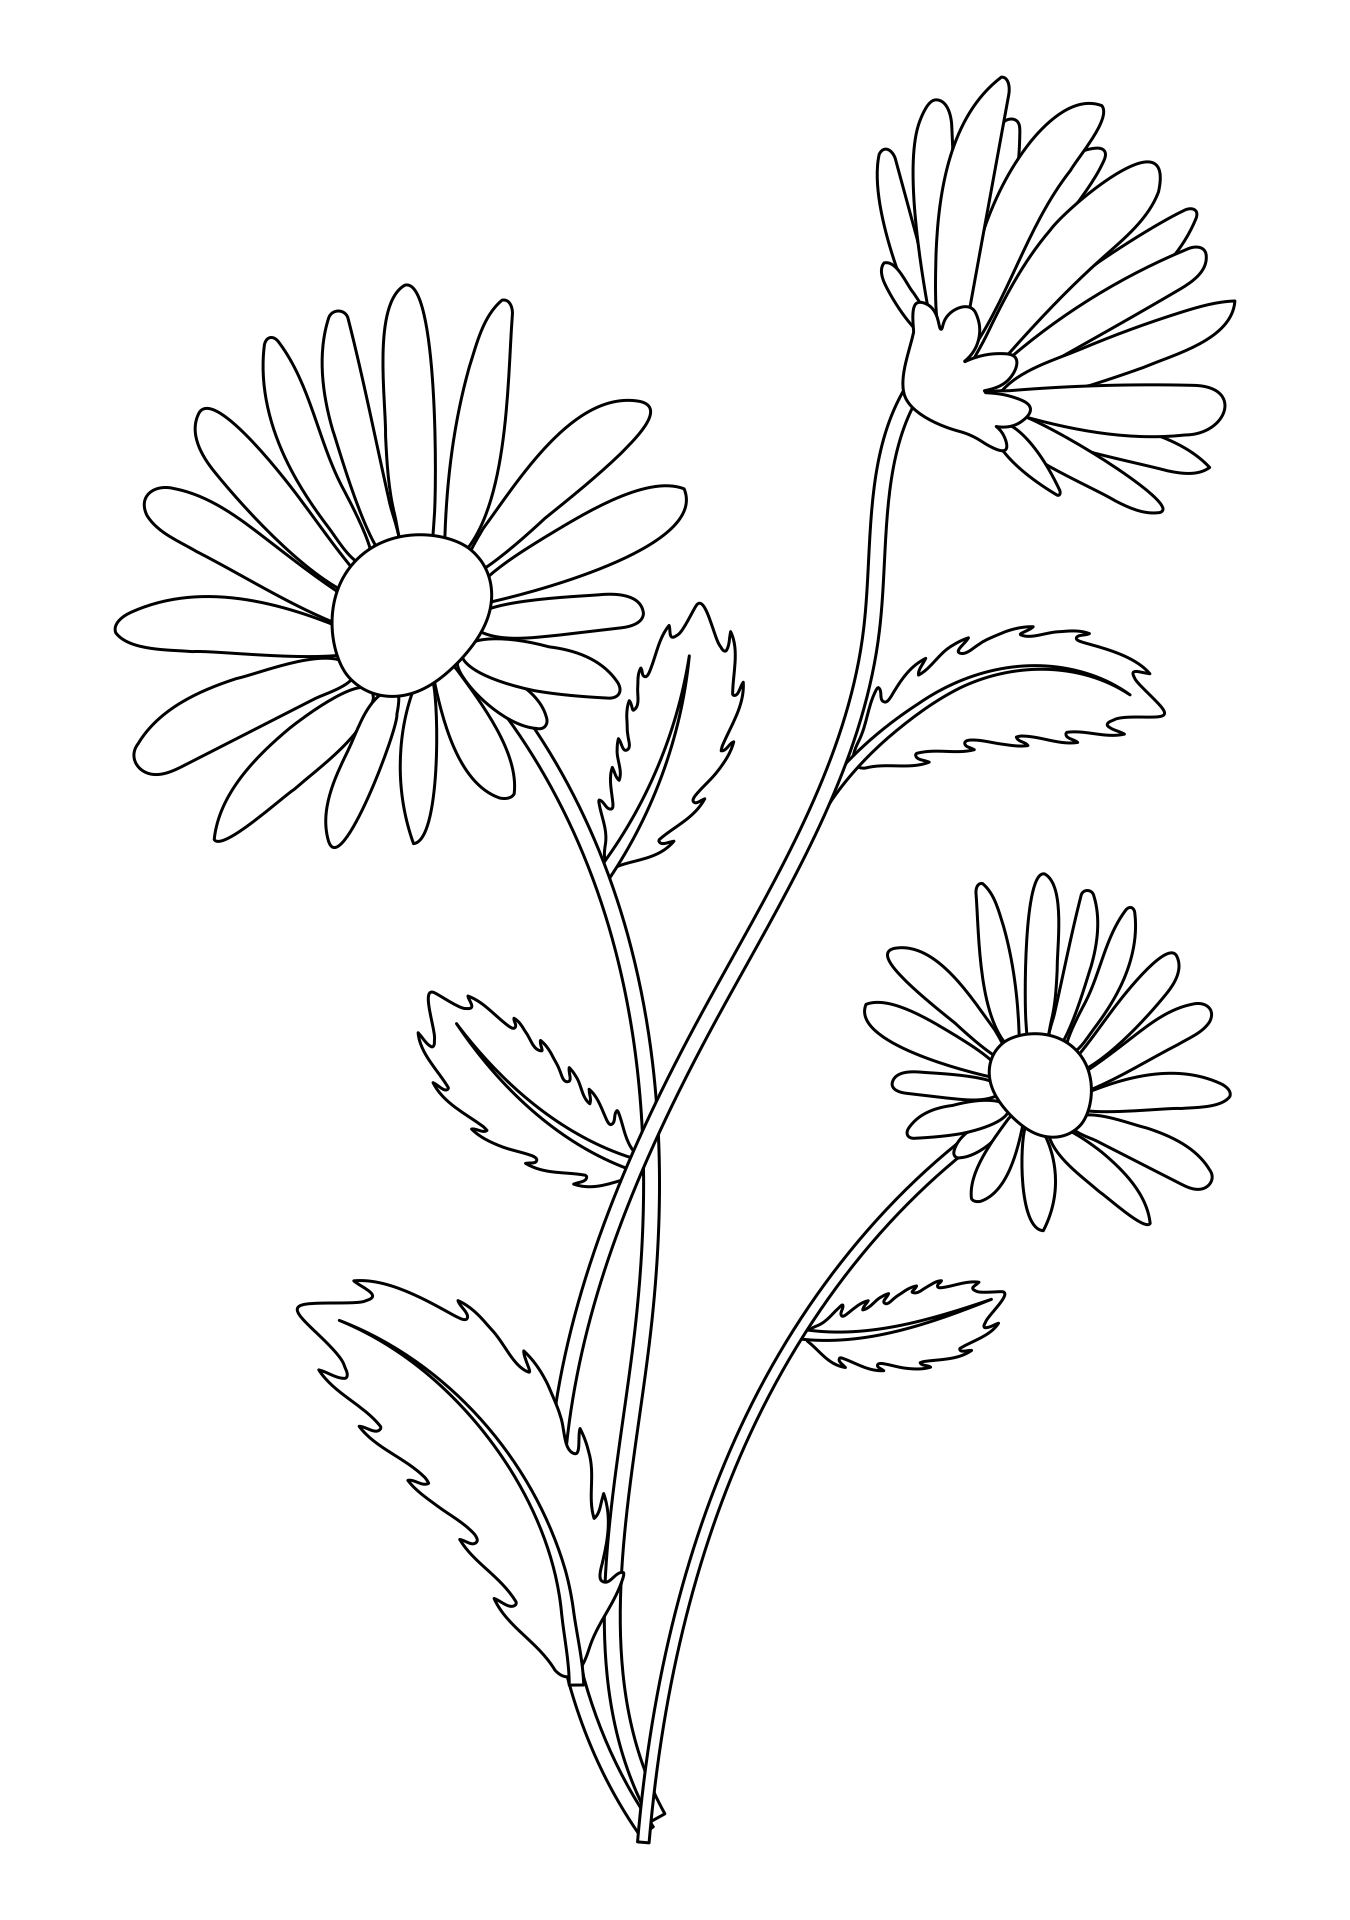 Daisy Flower Embroidery Pattern